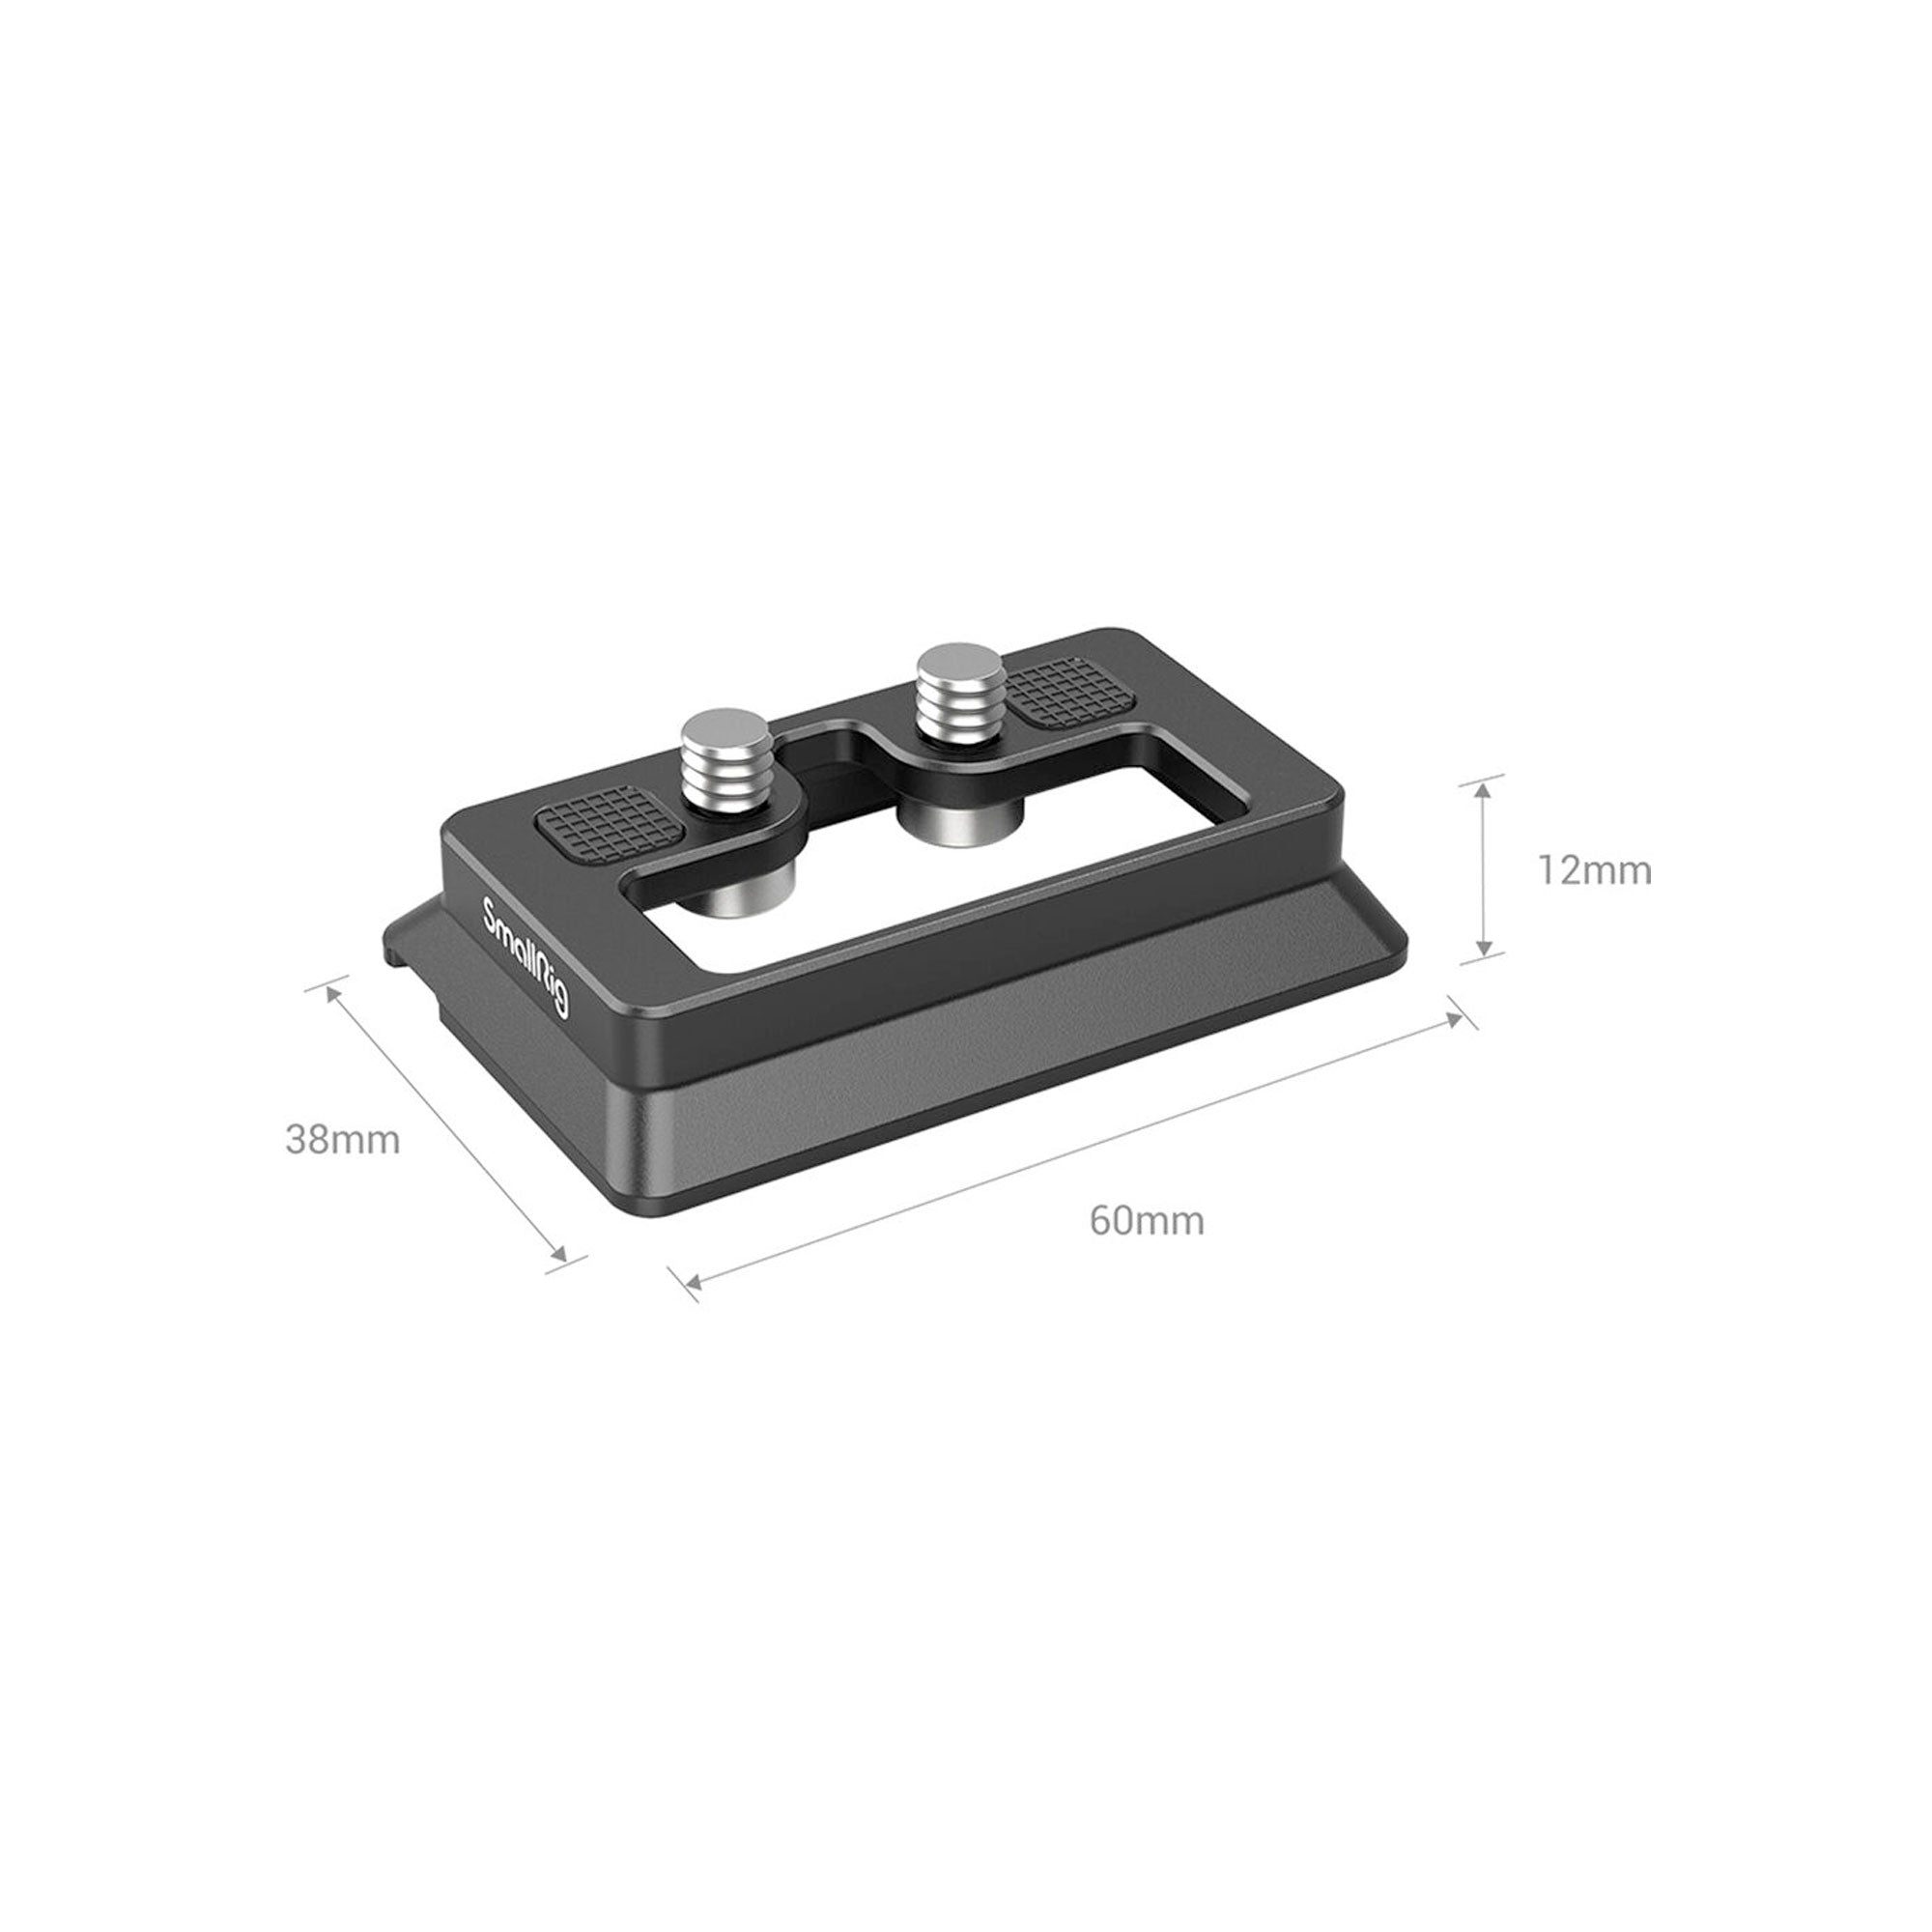 SmallRig Arca-Swiss Quick Release Plate for DJI RS 2 / RSC 2 / RS 3 / RS 3 Pro Stabilizers 3154